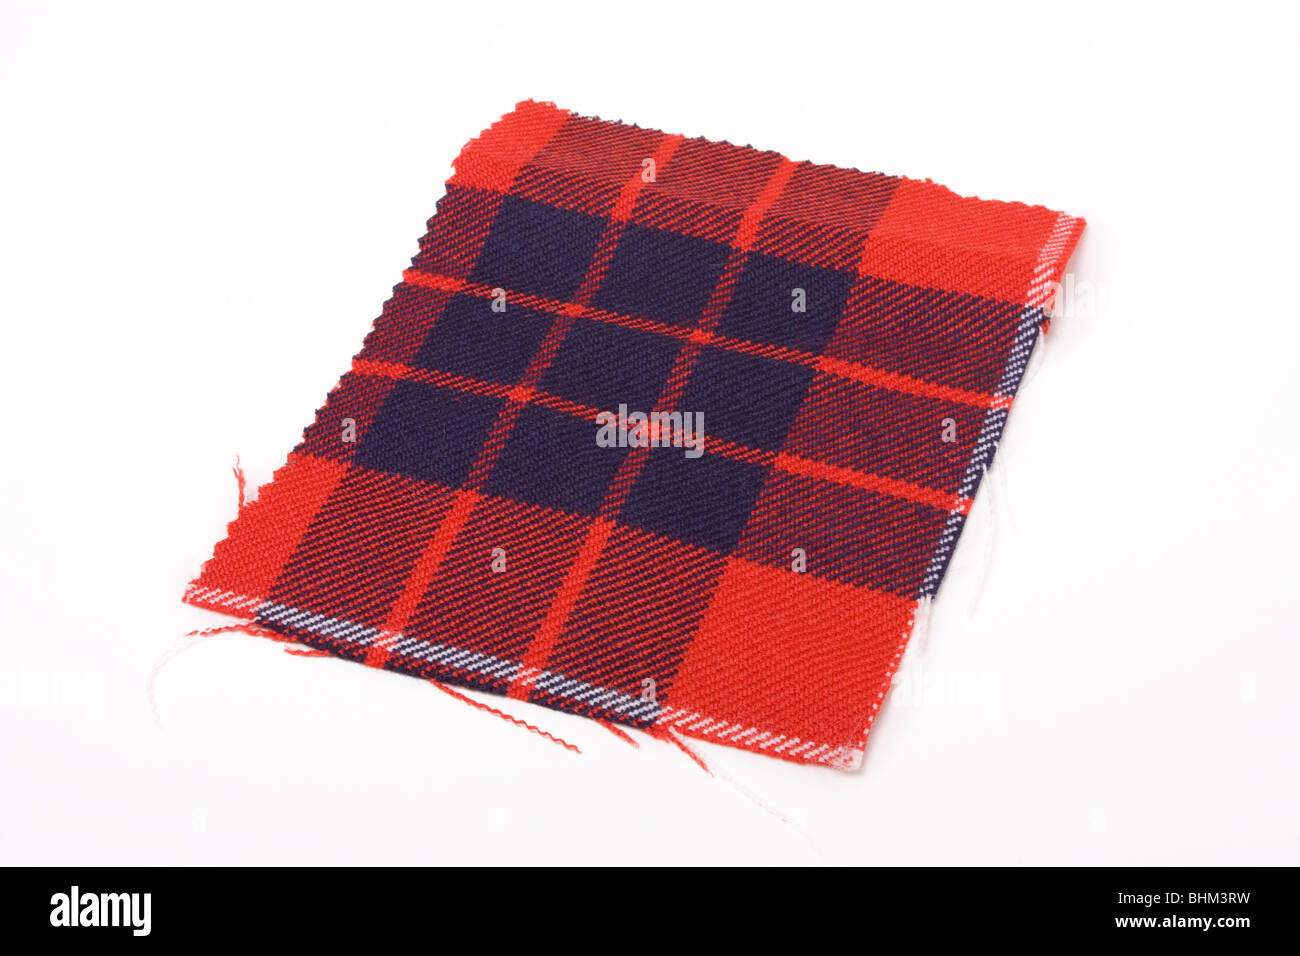 A swatch of red and blue tartan cloth against white background. Stock Photo